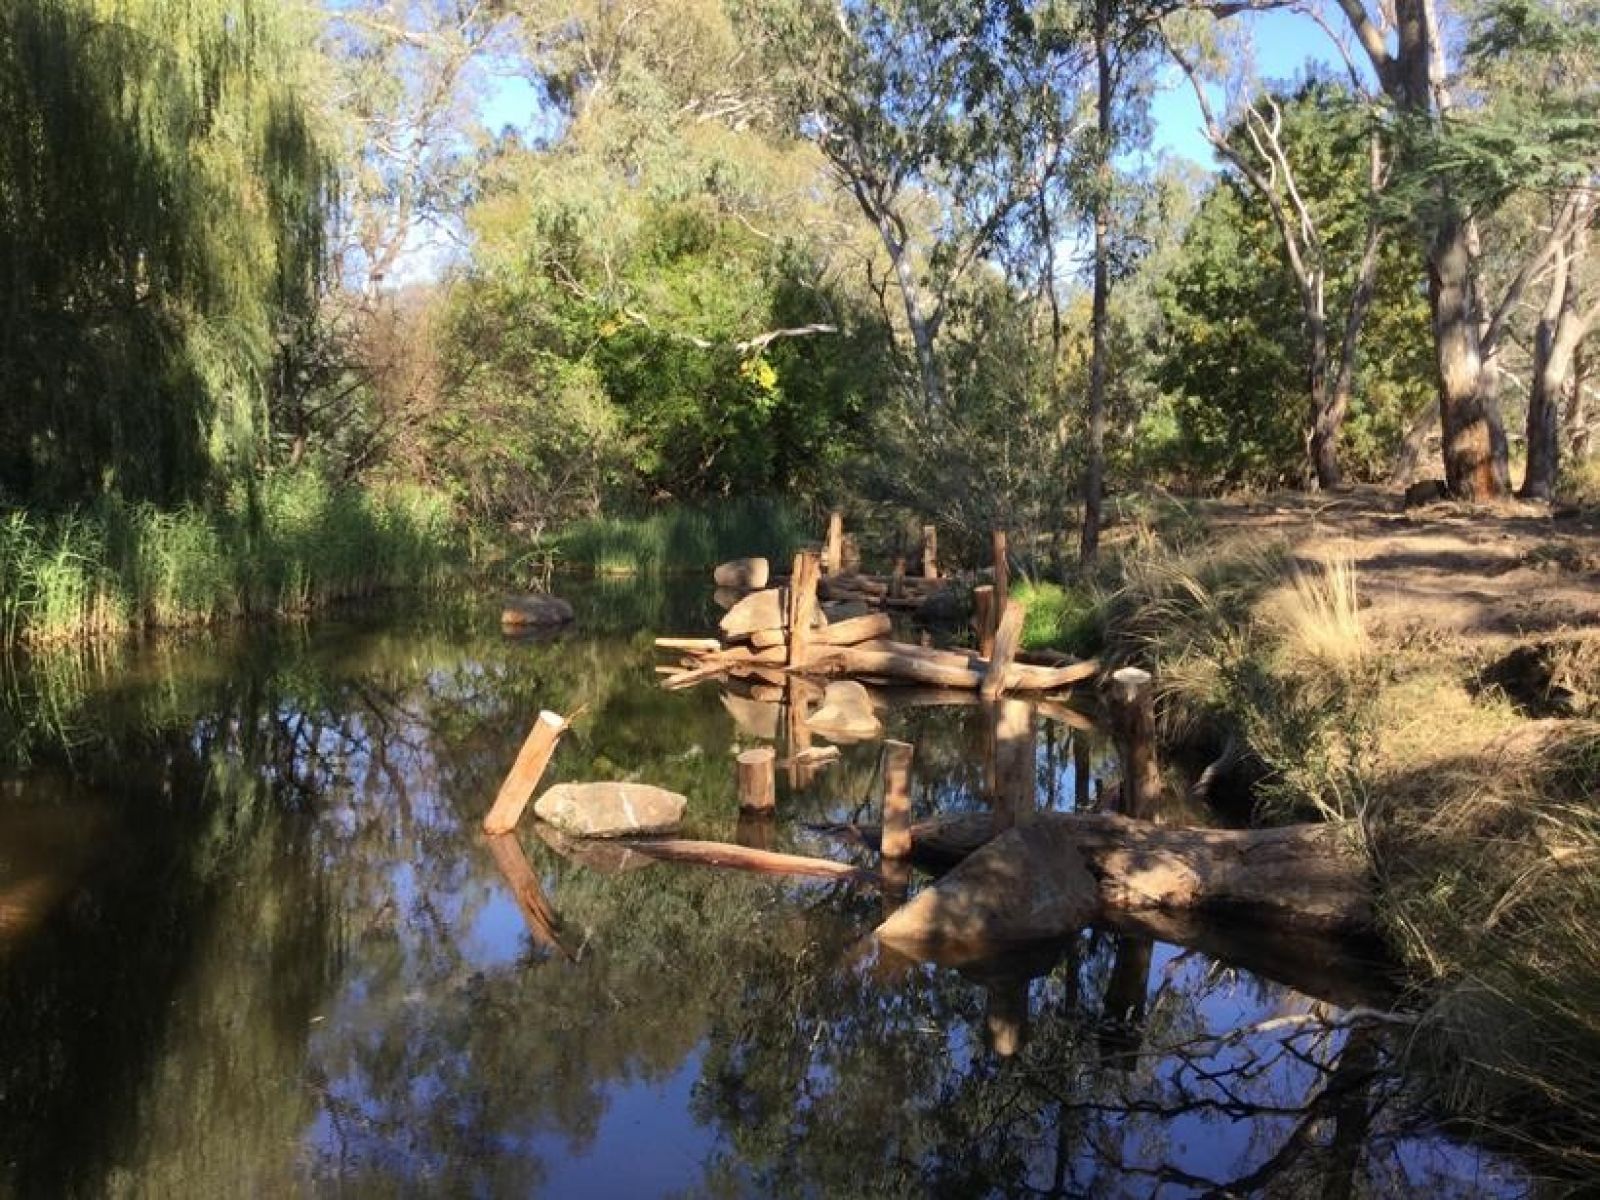 A creek is surrounded by native eucalypts. A series of saw-off logs stick out from the water, surrounded by large stones. There are also large reeds growing on the other side of the creek’s bank. There is also a large willow tree; a non-native tree that negatively affects the health of river and creek ecosystems.